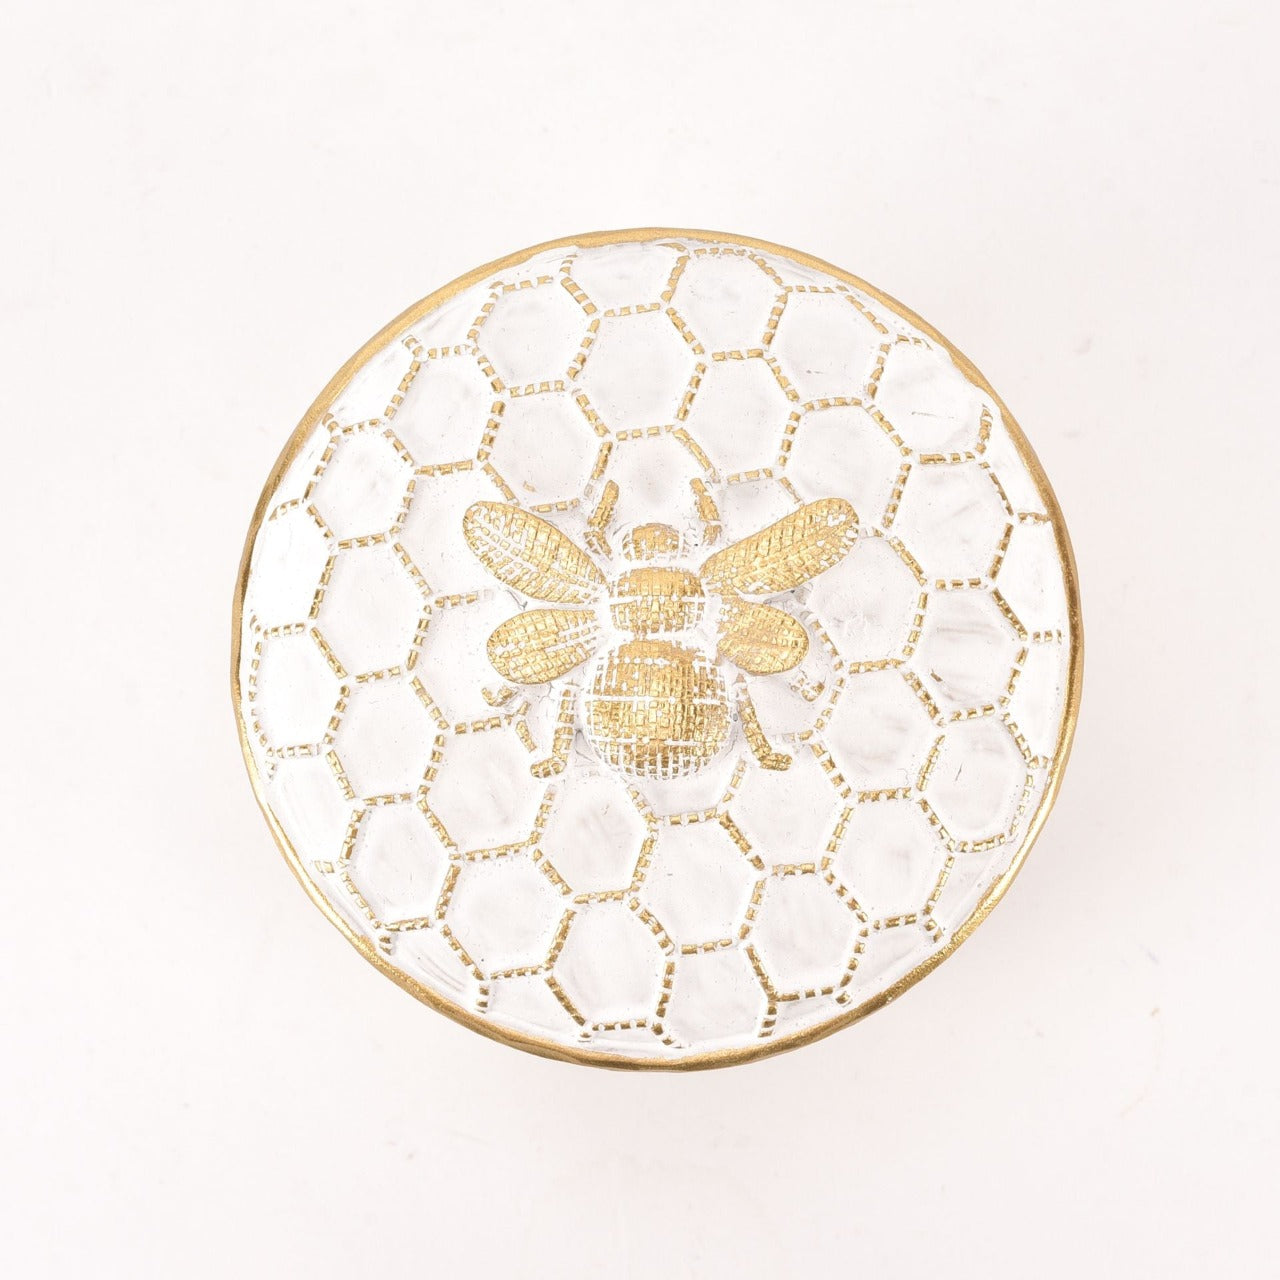 Honey Bee Resin Trinket Box  Bring some glamour to the home with this gorgeous golden bee trinket box. From the Wildflower collection by HESTIA® - homeware inspired by the Great British outdoors.